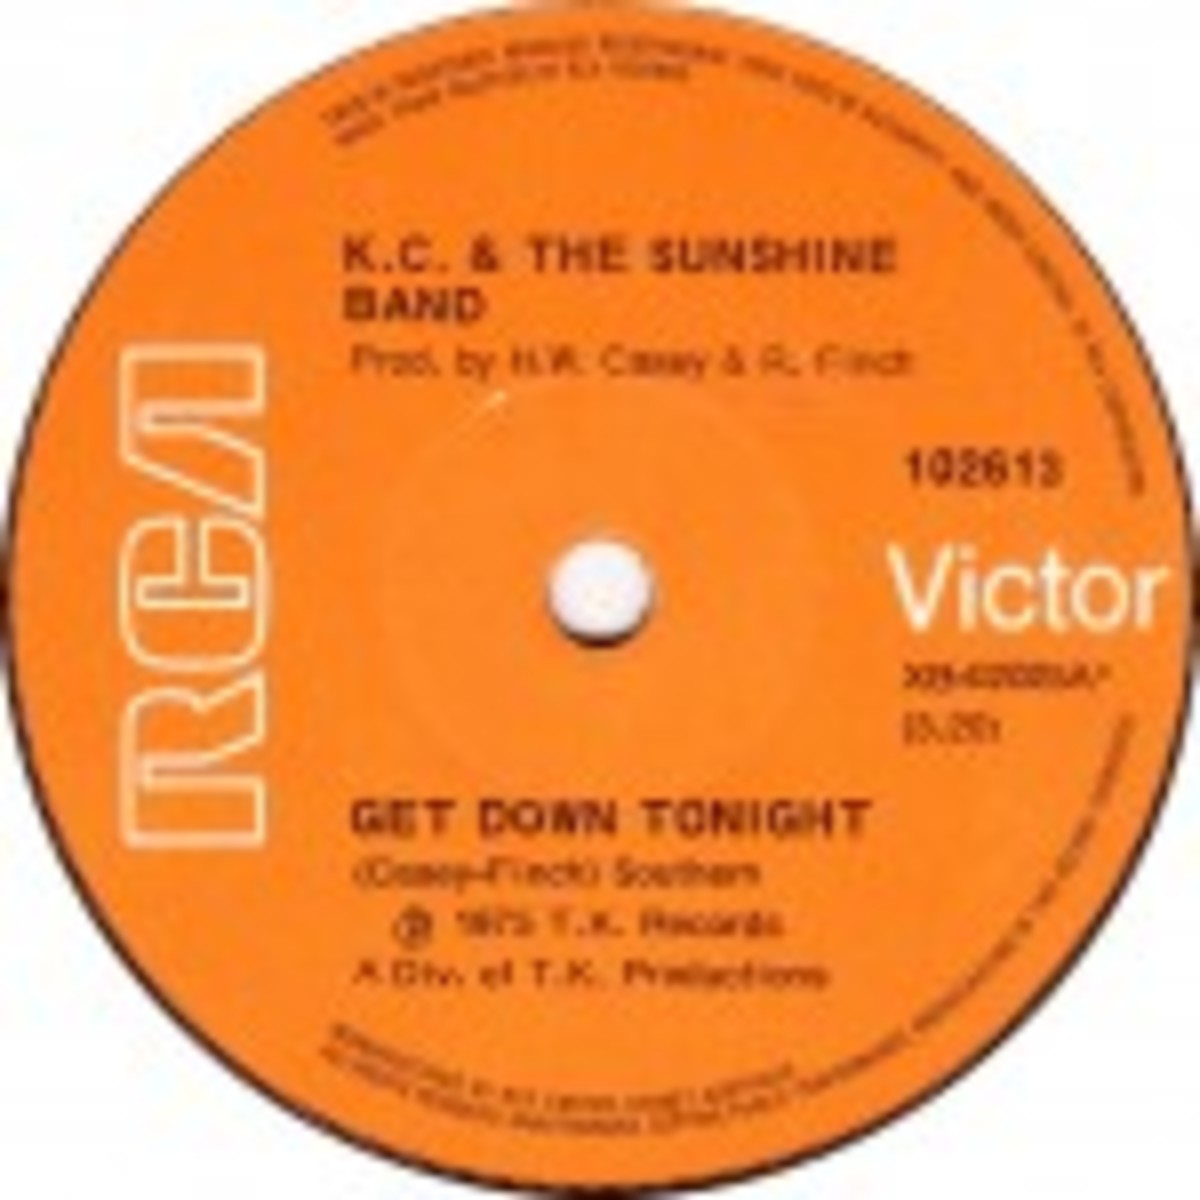 KC and the Sunshine Band Get Down Tonight